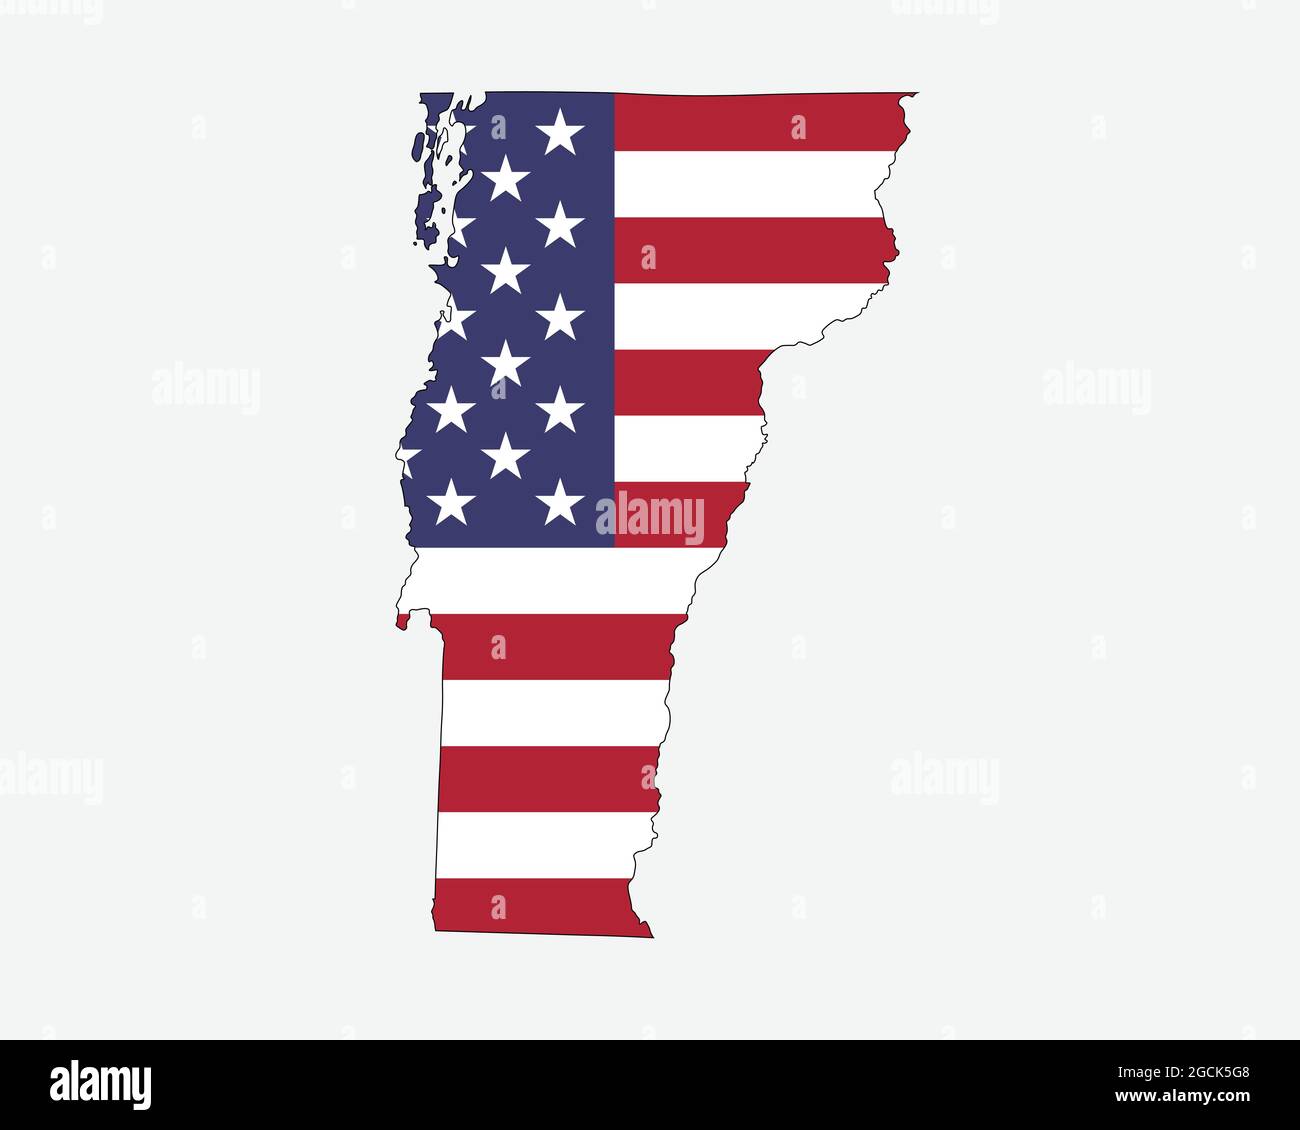 Vermont Map on American Flag. VT, USA State Map on US Flag. EPS Vector Graphic Clipart Icon Stock Vector